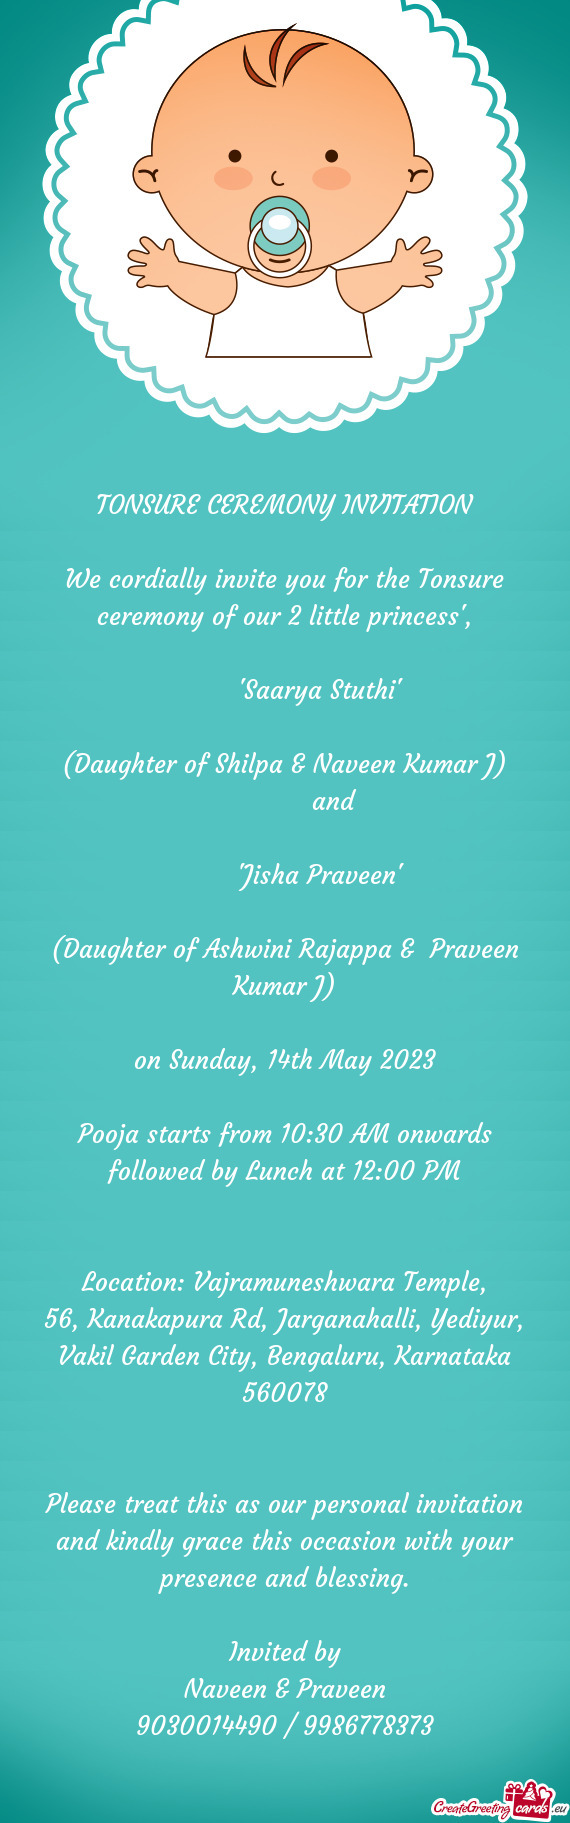 We cordially invite you for the Tonsure ceremony of our 2 little princess'